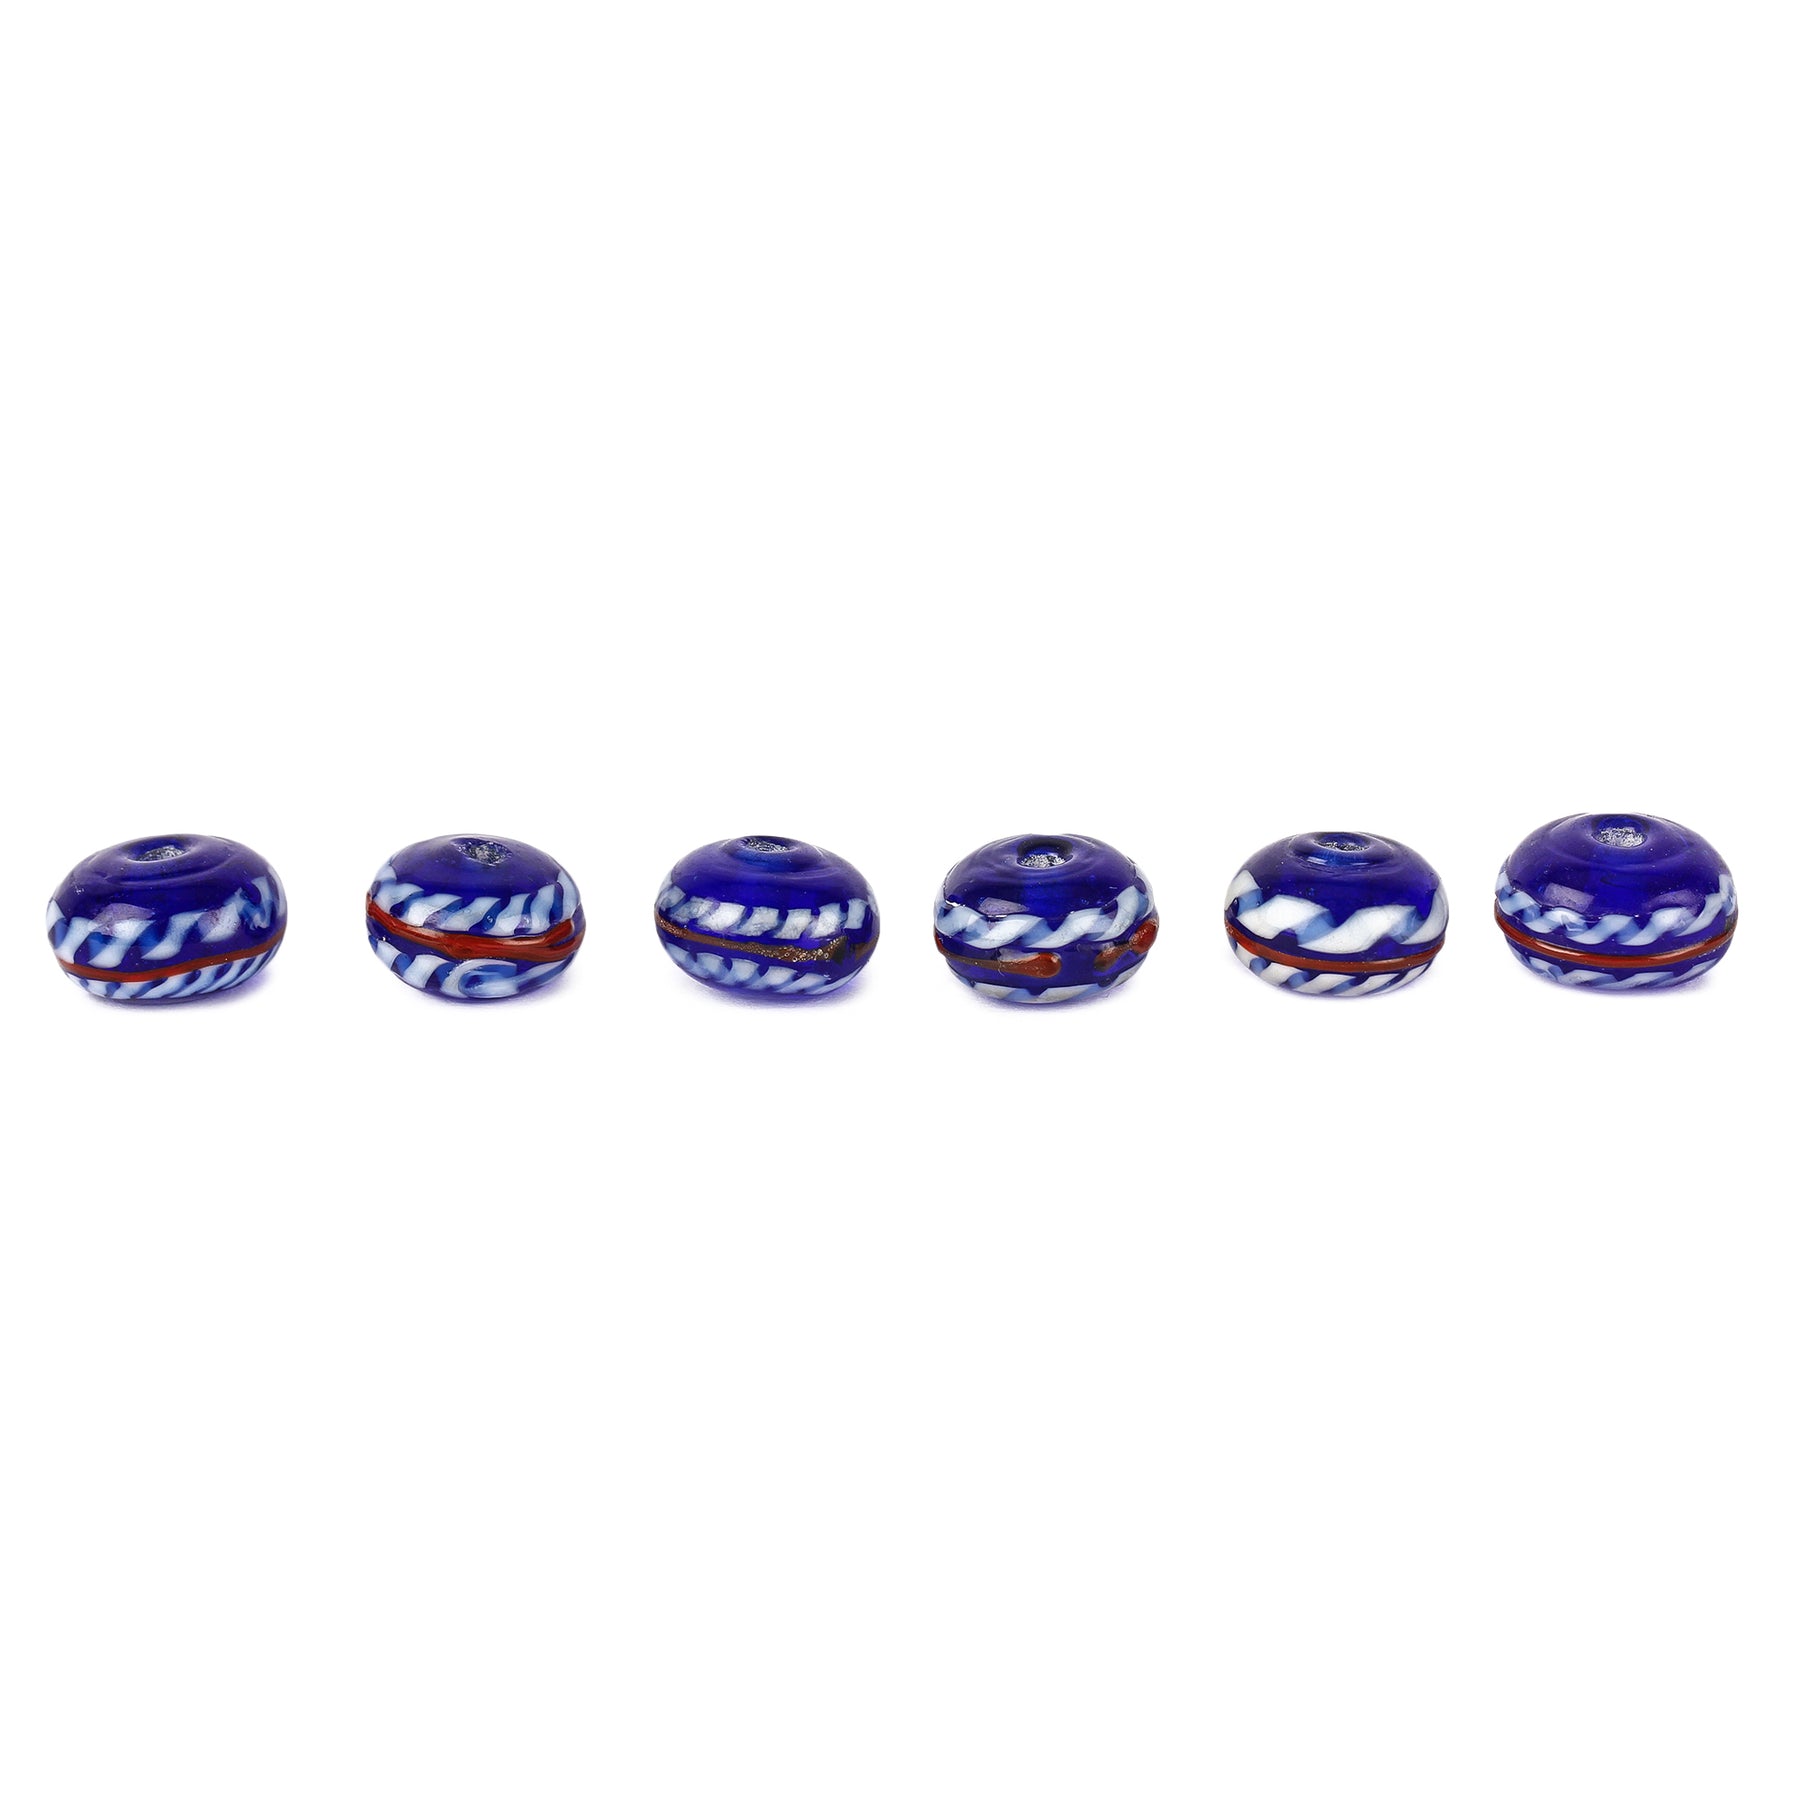 Blue glass bead with twisted decor